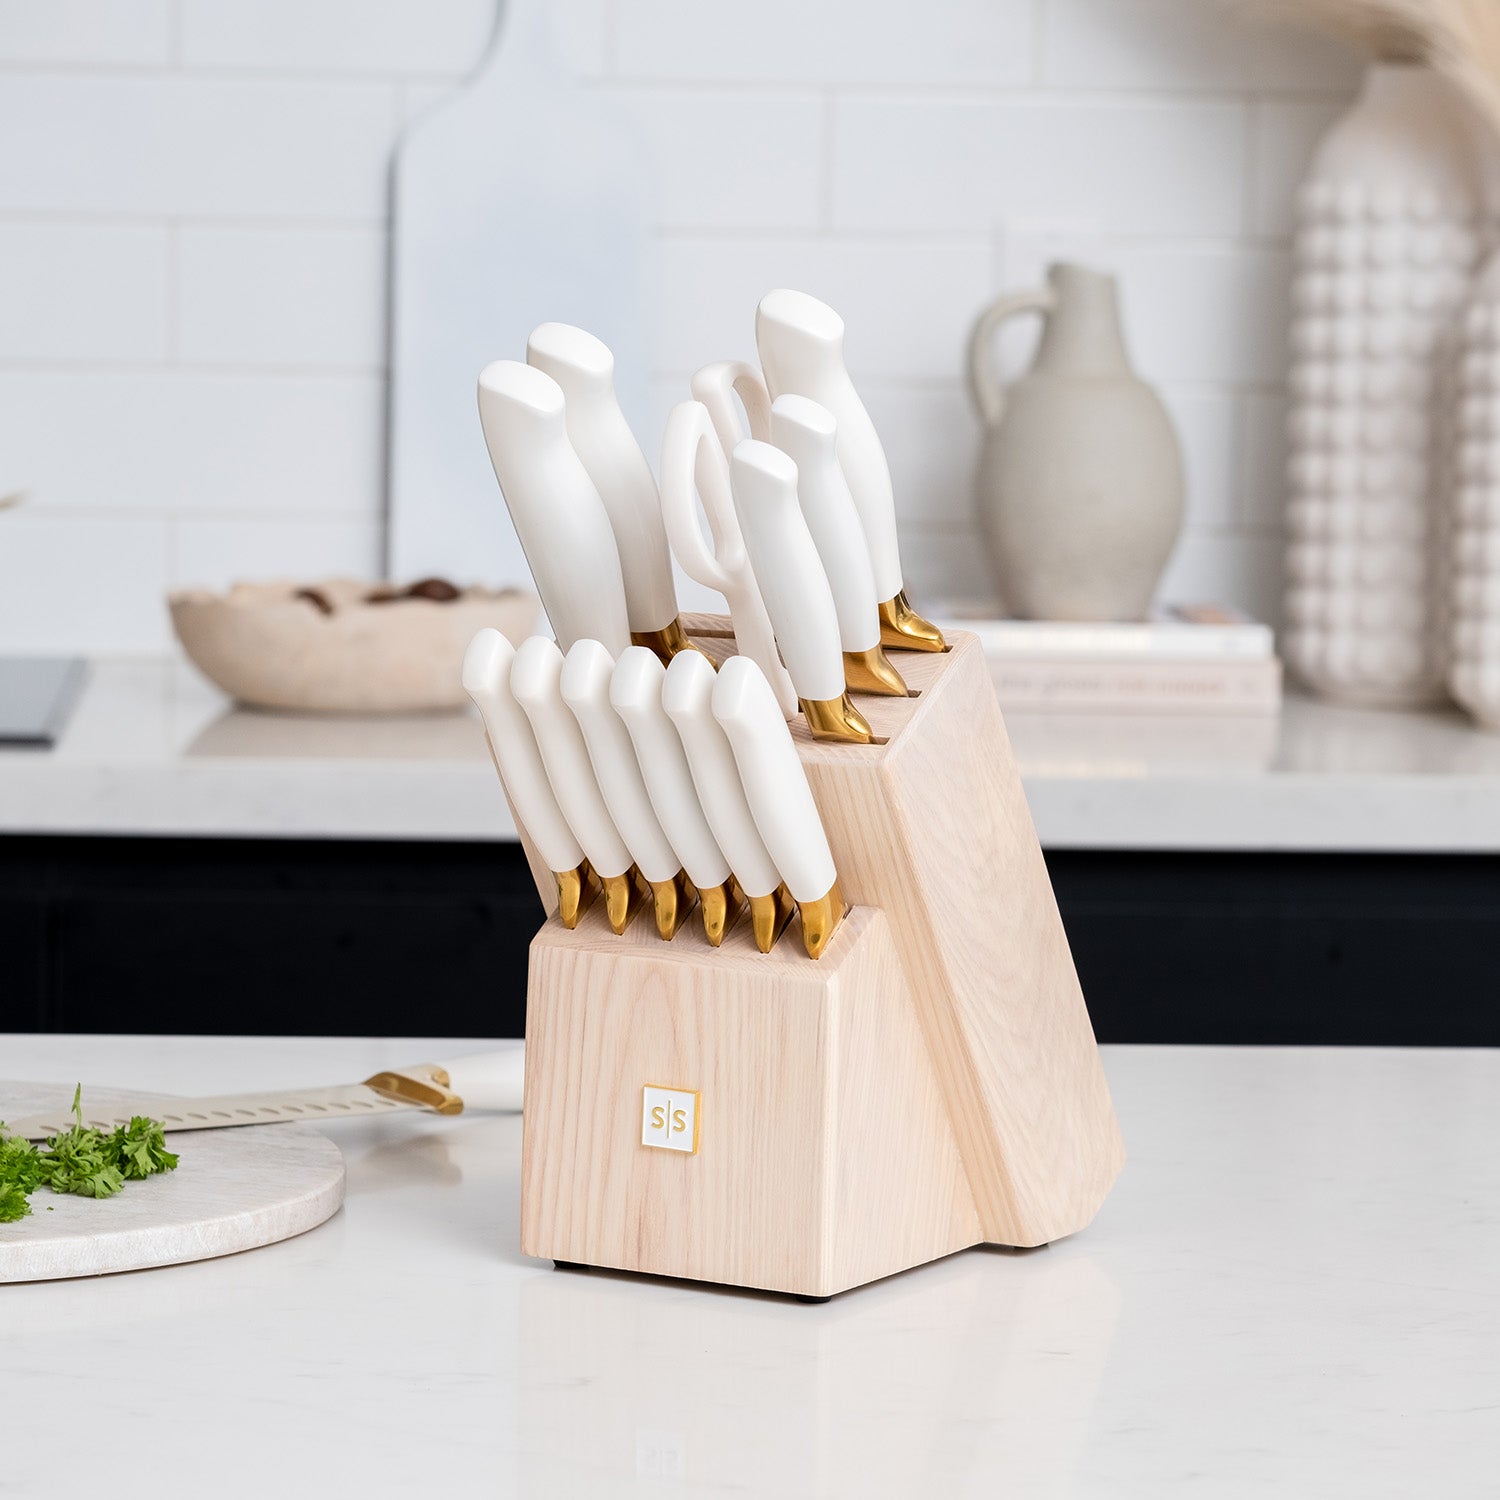 White and Gold Knife Set with Sharpener - 14pc Self Sharpening Knife Block Set - White and Gold Kitchen Accessories, Gold Kitchen Decor